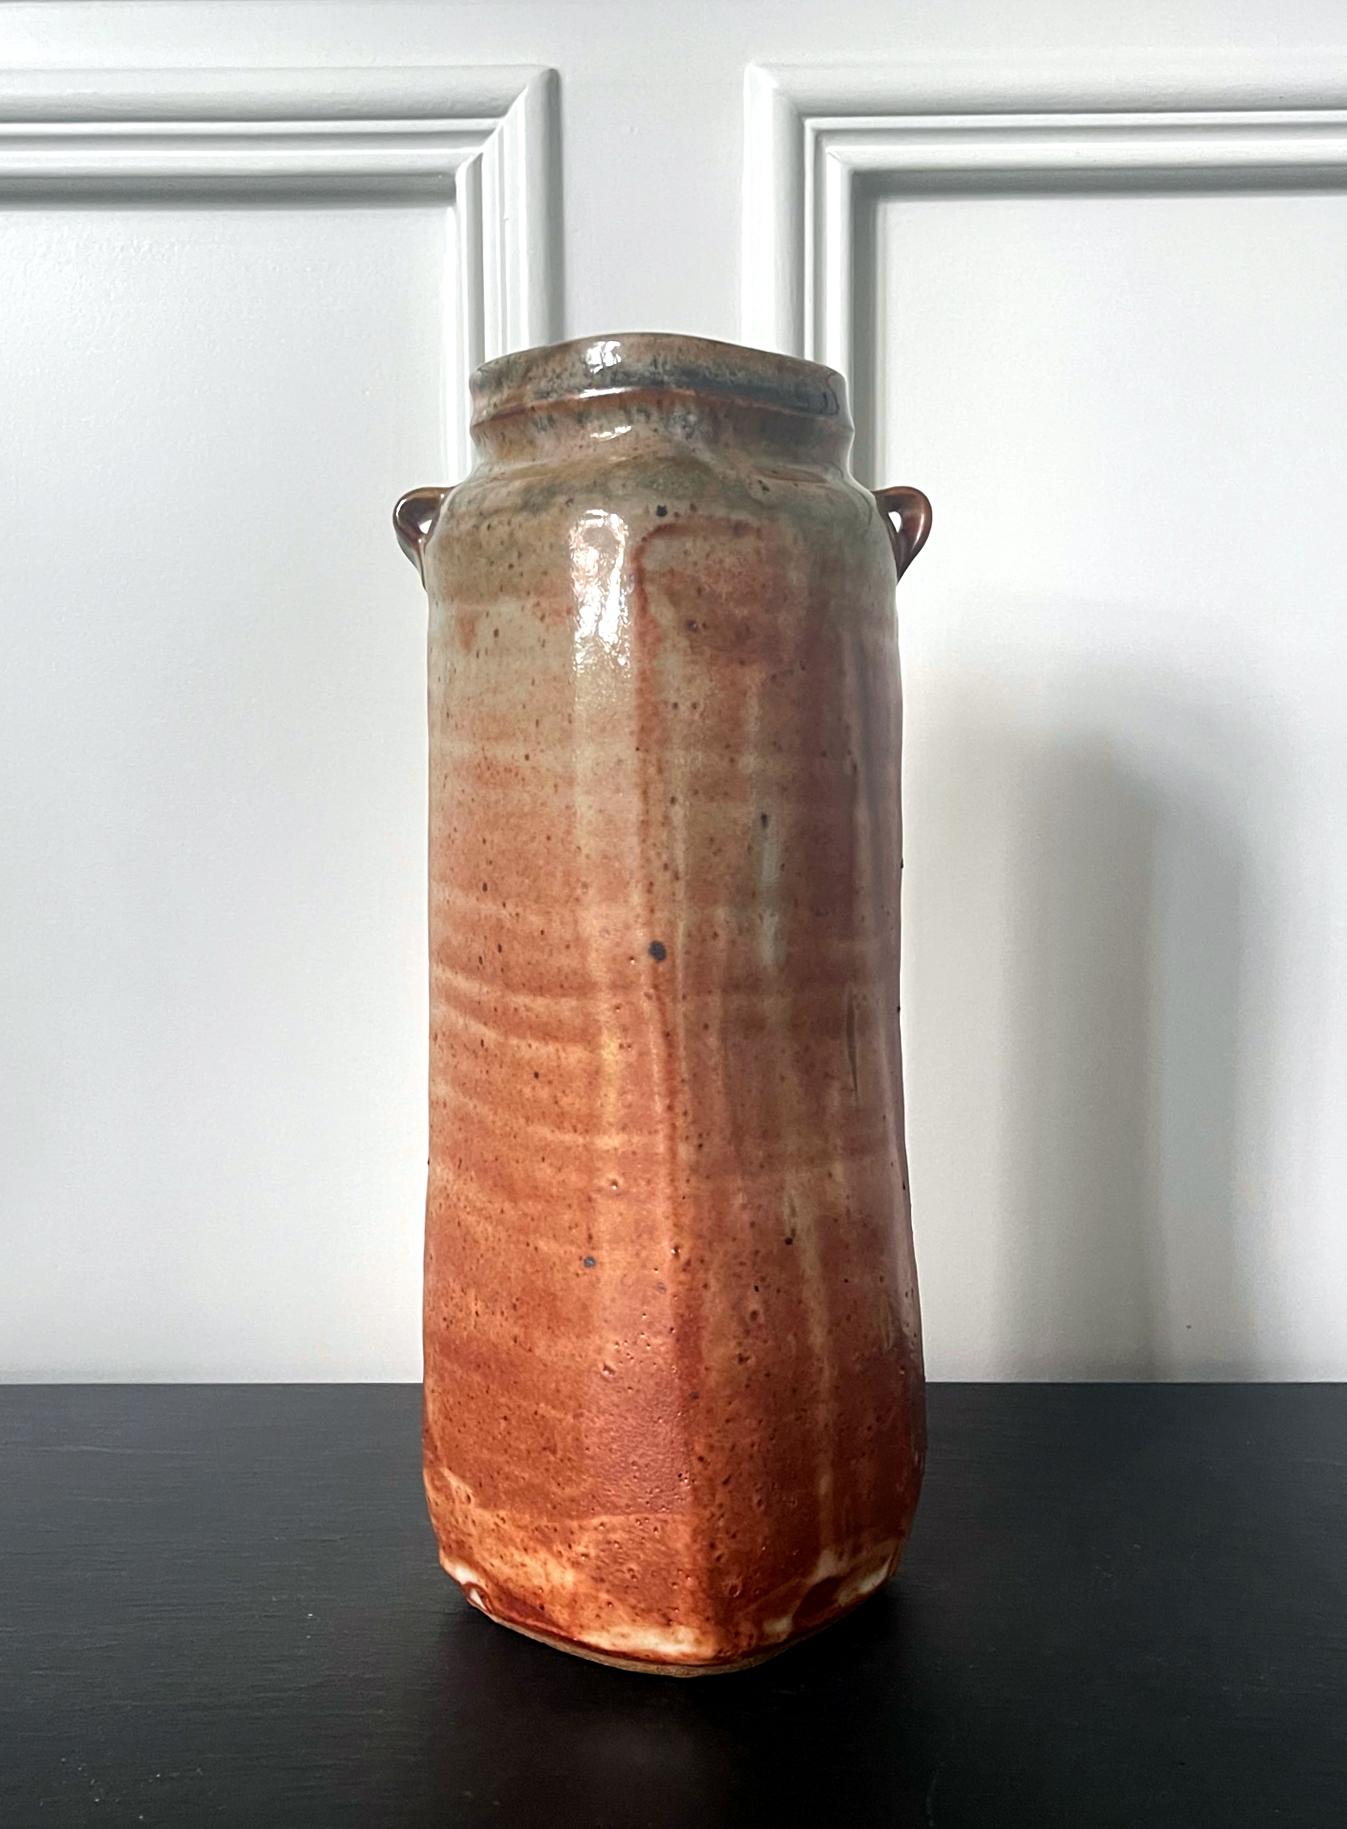 A tall cylinder shape stoneware vase by American studio potter Warren MacKenzie (1924-2018). The vase displays a slightly ambiguous shape between circle and sqaure and it features two small loops on the shoulder. The surface is covered in a